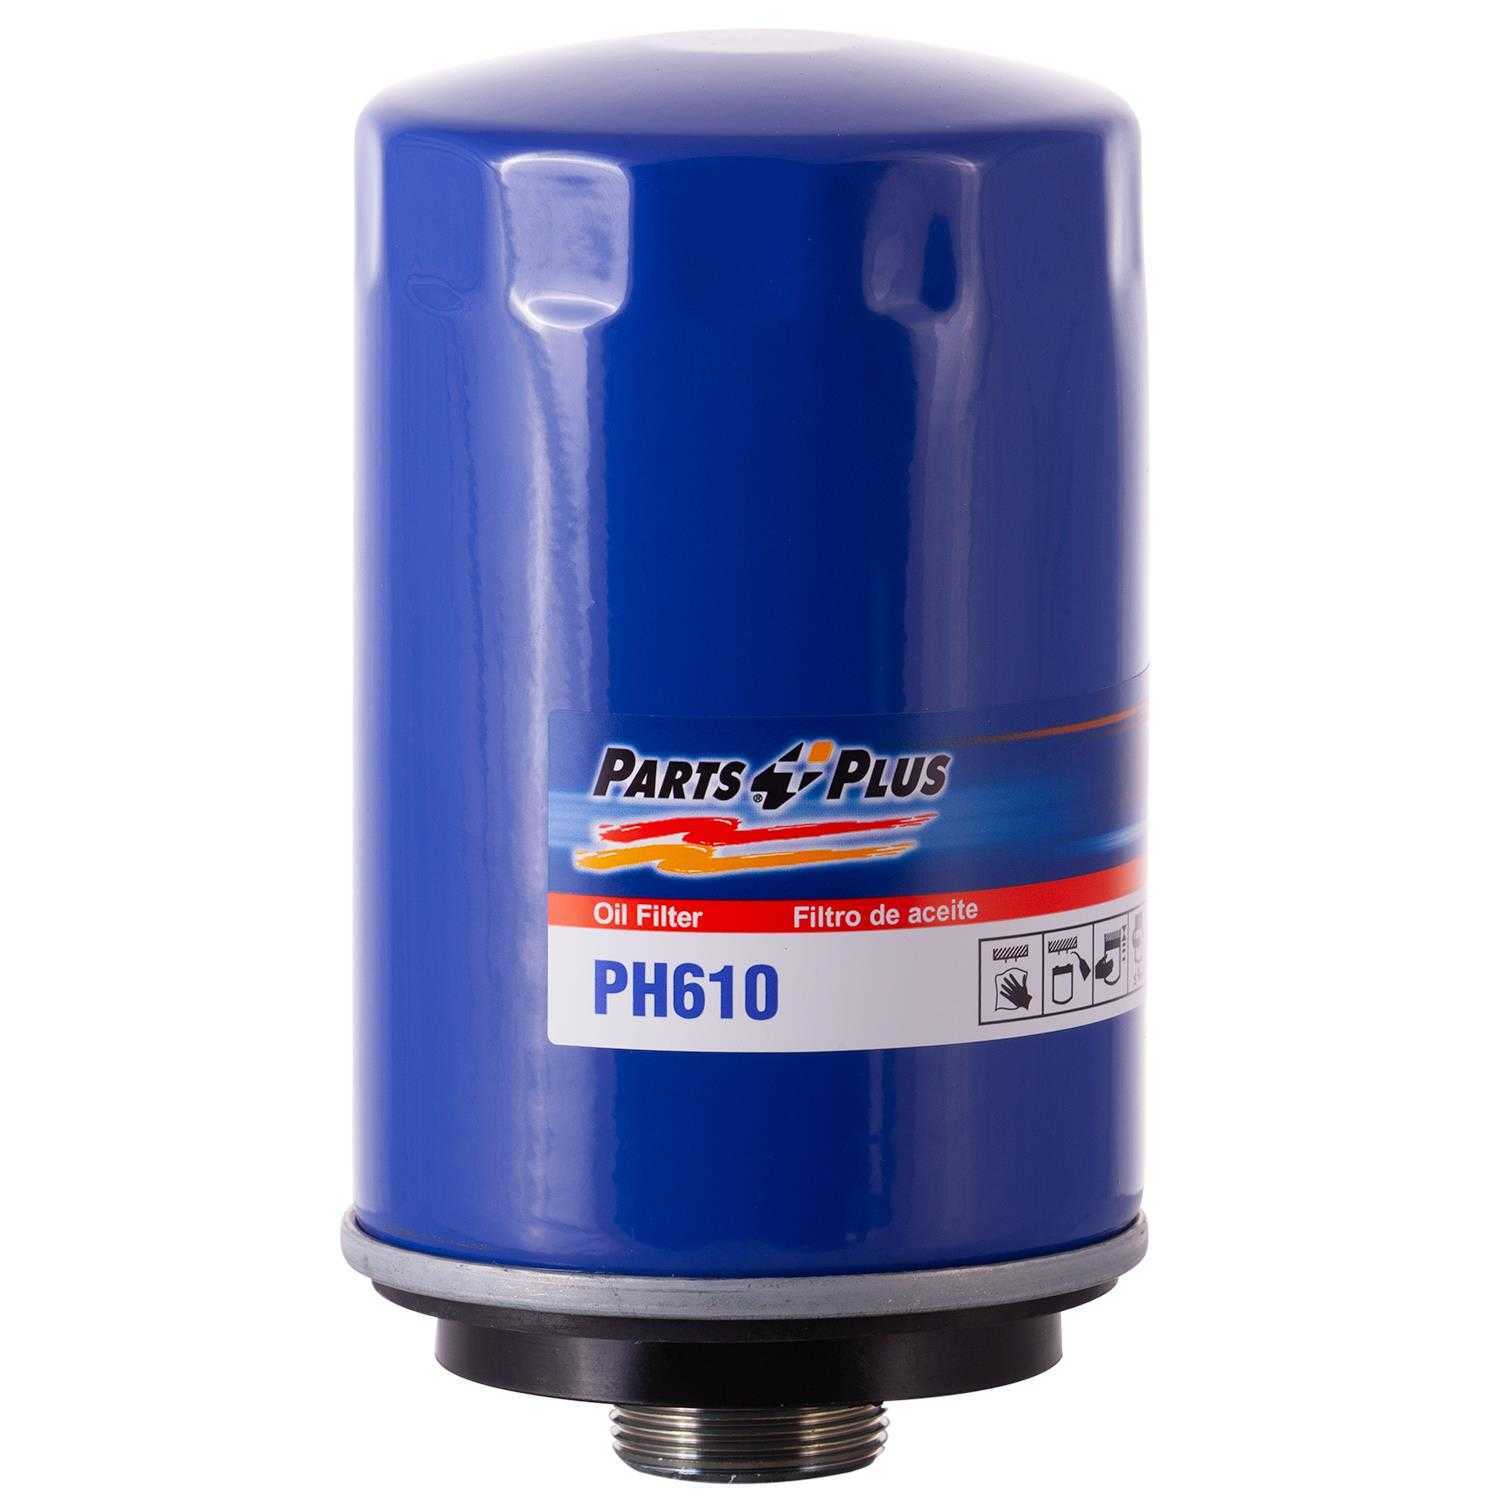 PARTS PLUS FILTERS BY PREMIUM GUARD - Standard Life Oil Filter - PLF PH610